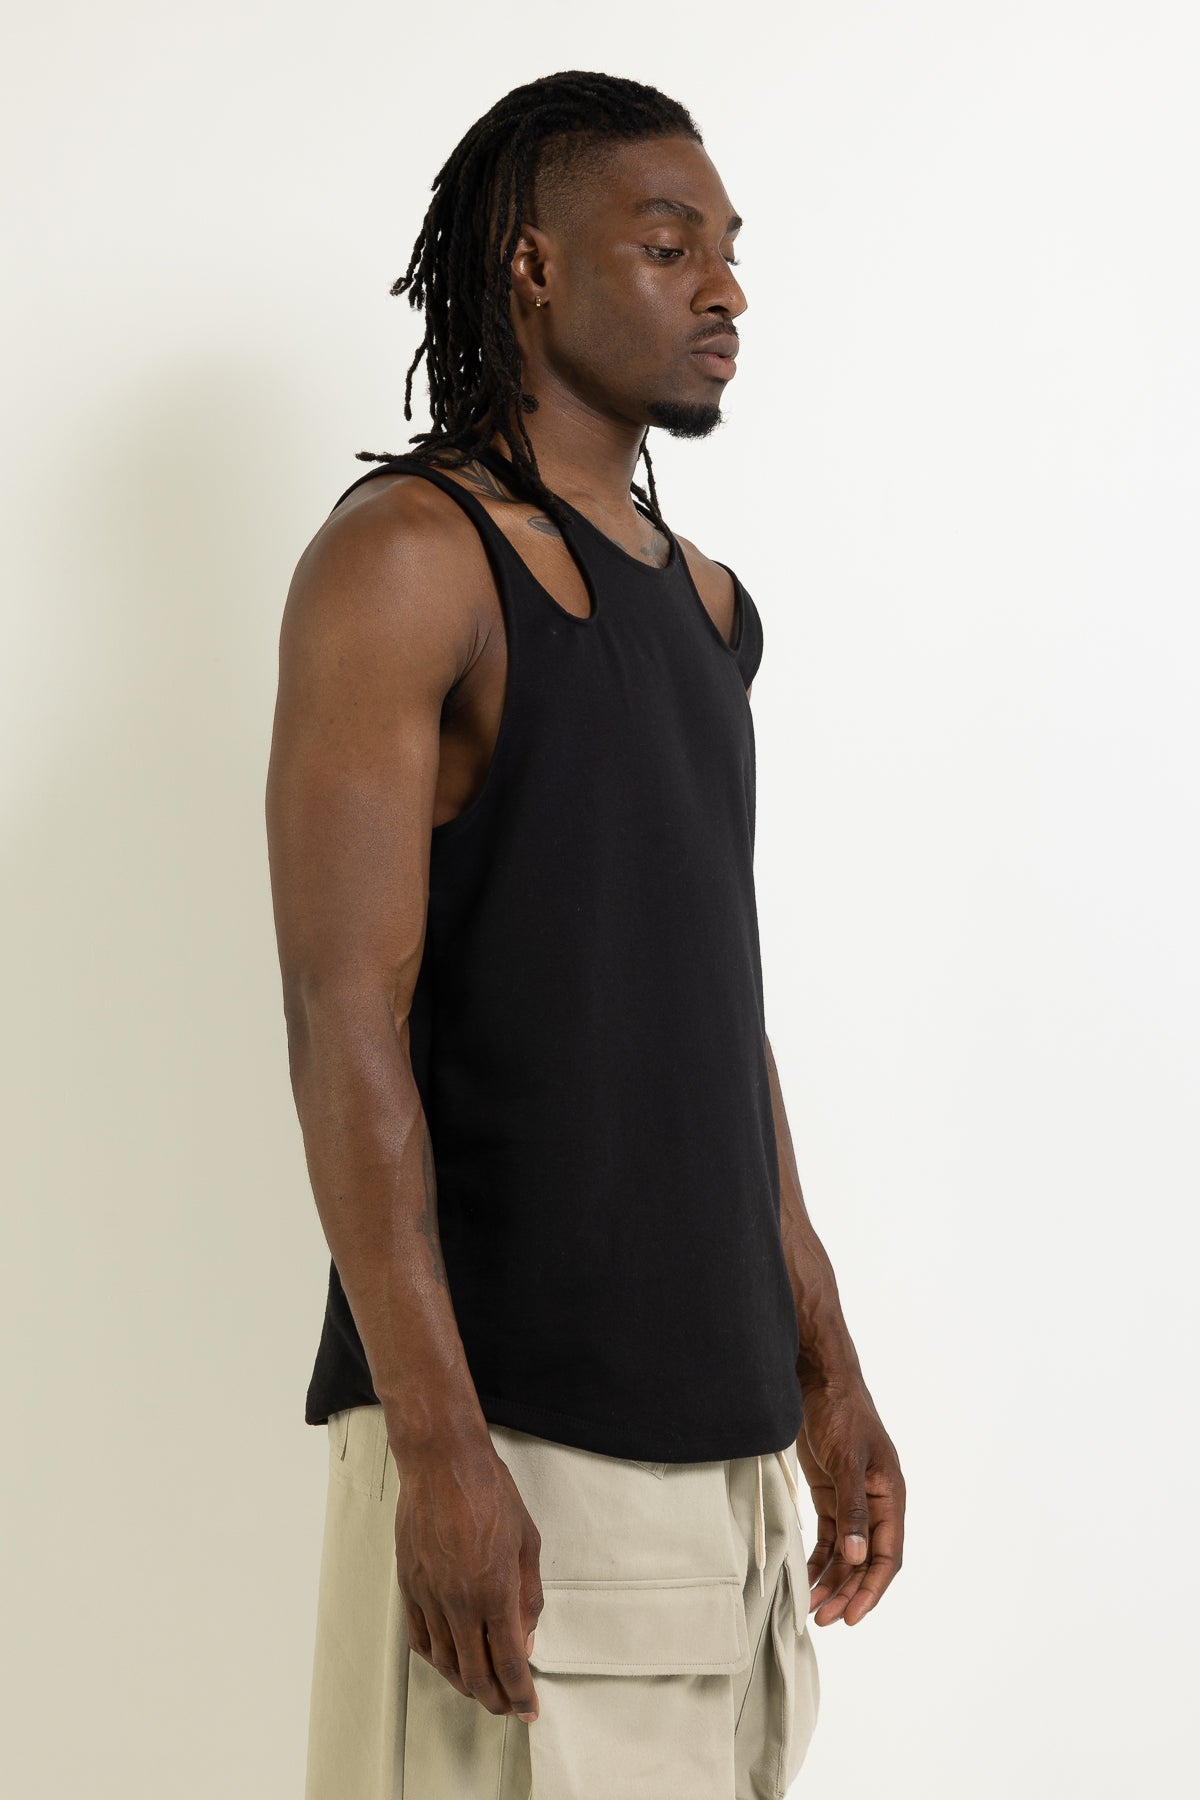 DYLAN CUTOUT TANK TOP - MERCY HOUSE